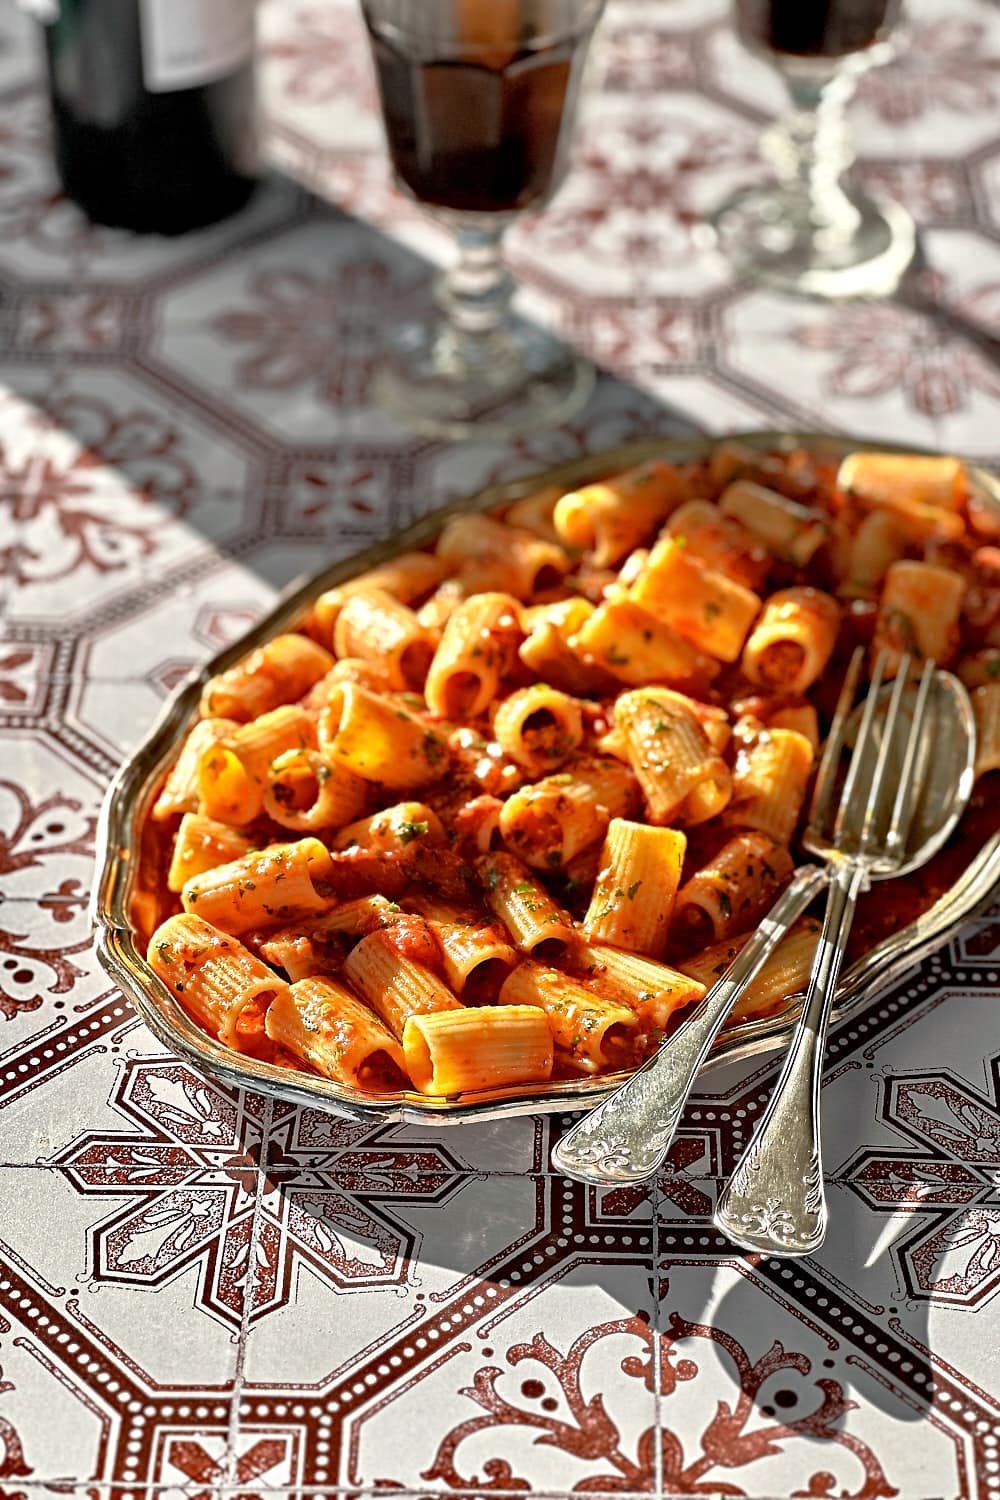 Rigatoni all'arrabbiata on a silver plate with a fork and spoon to serve it.